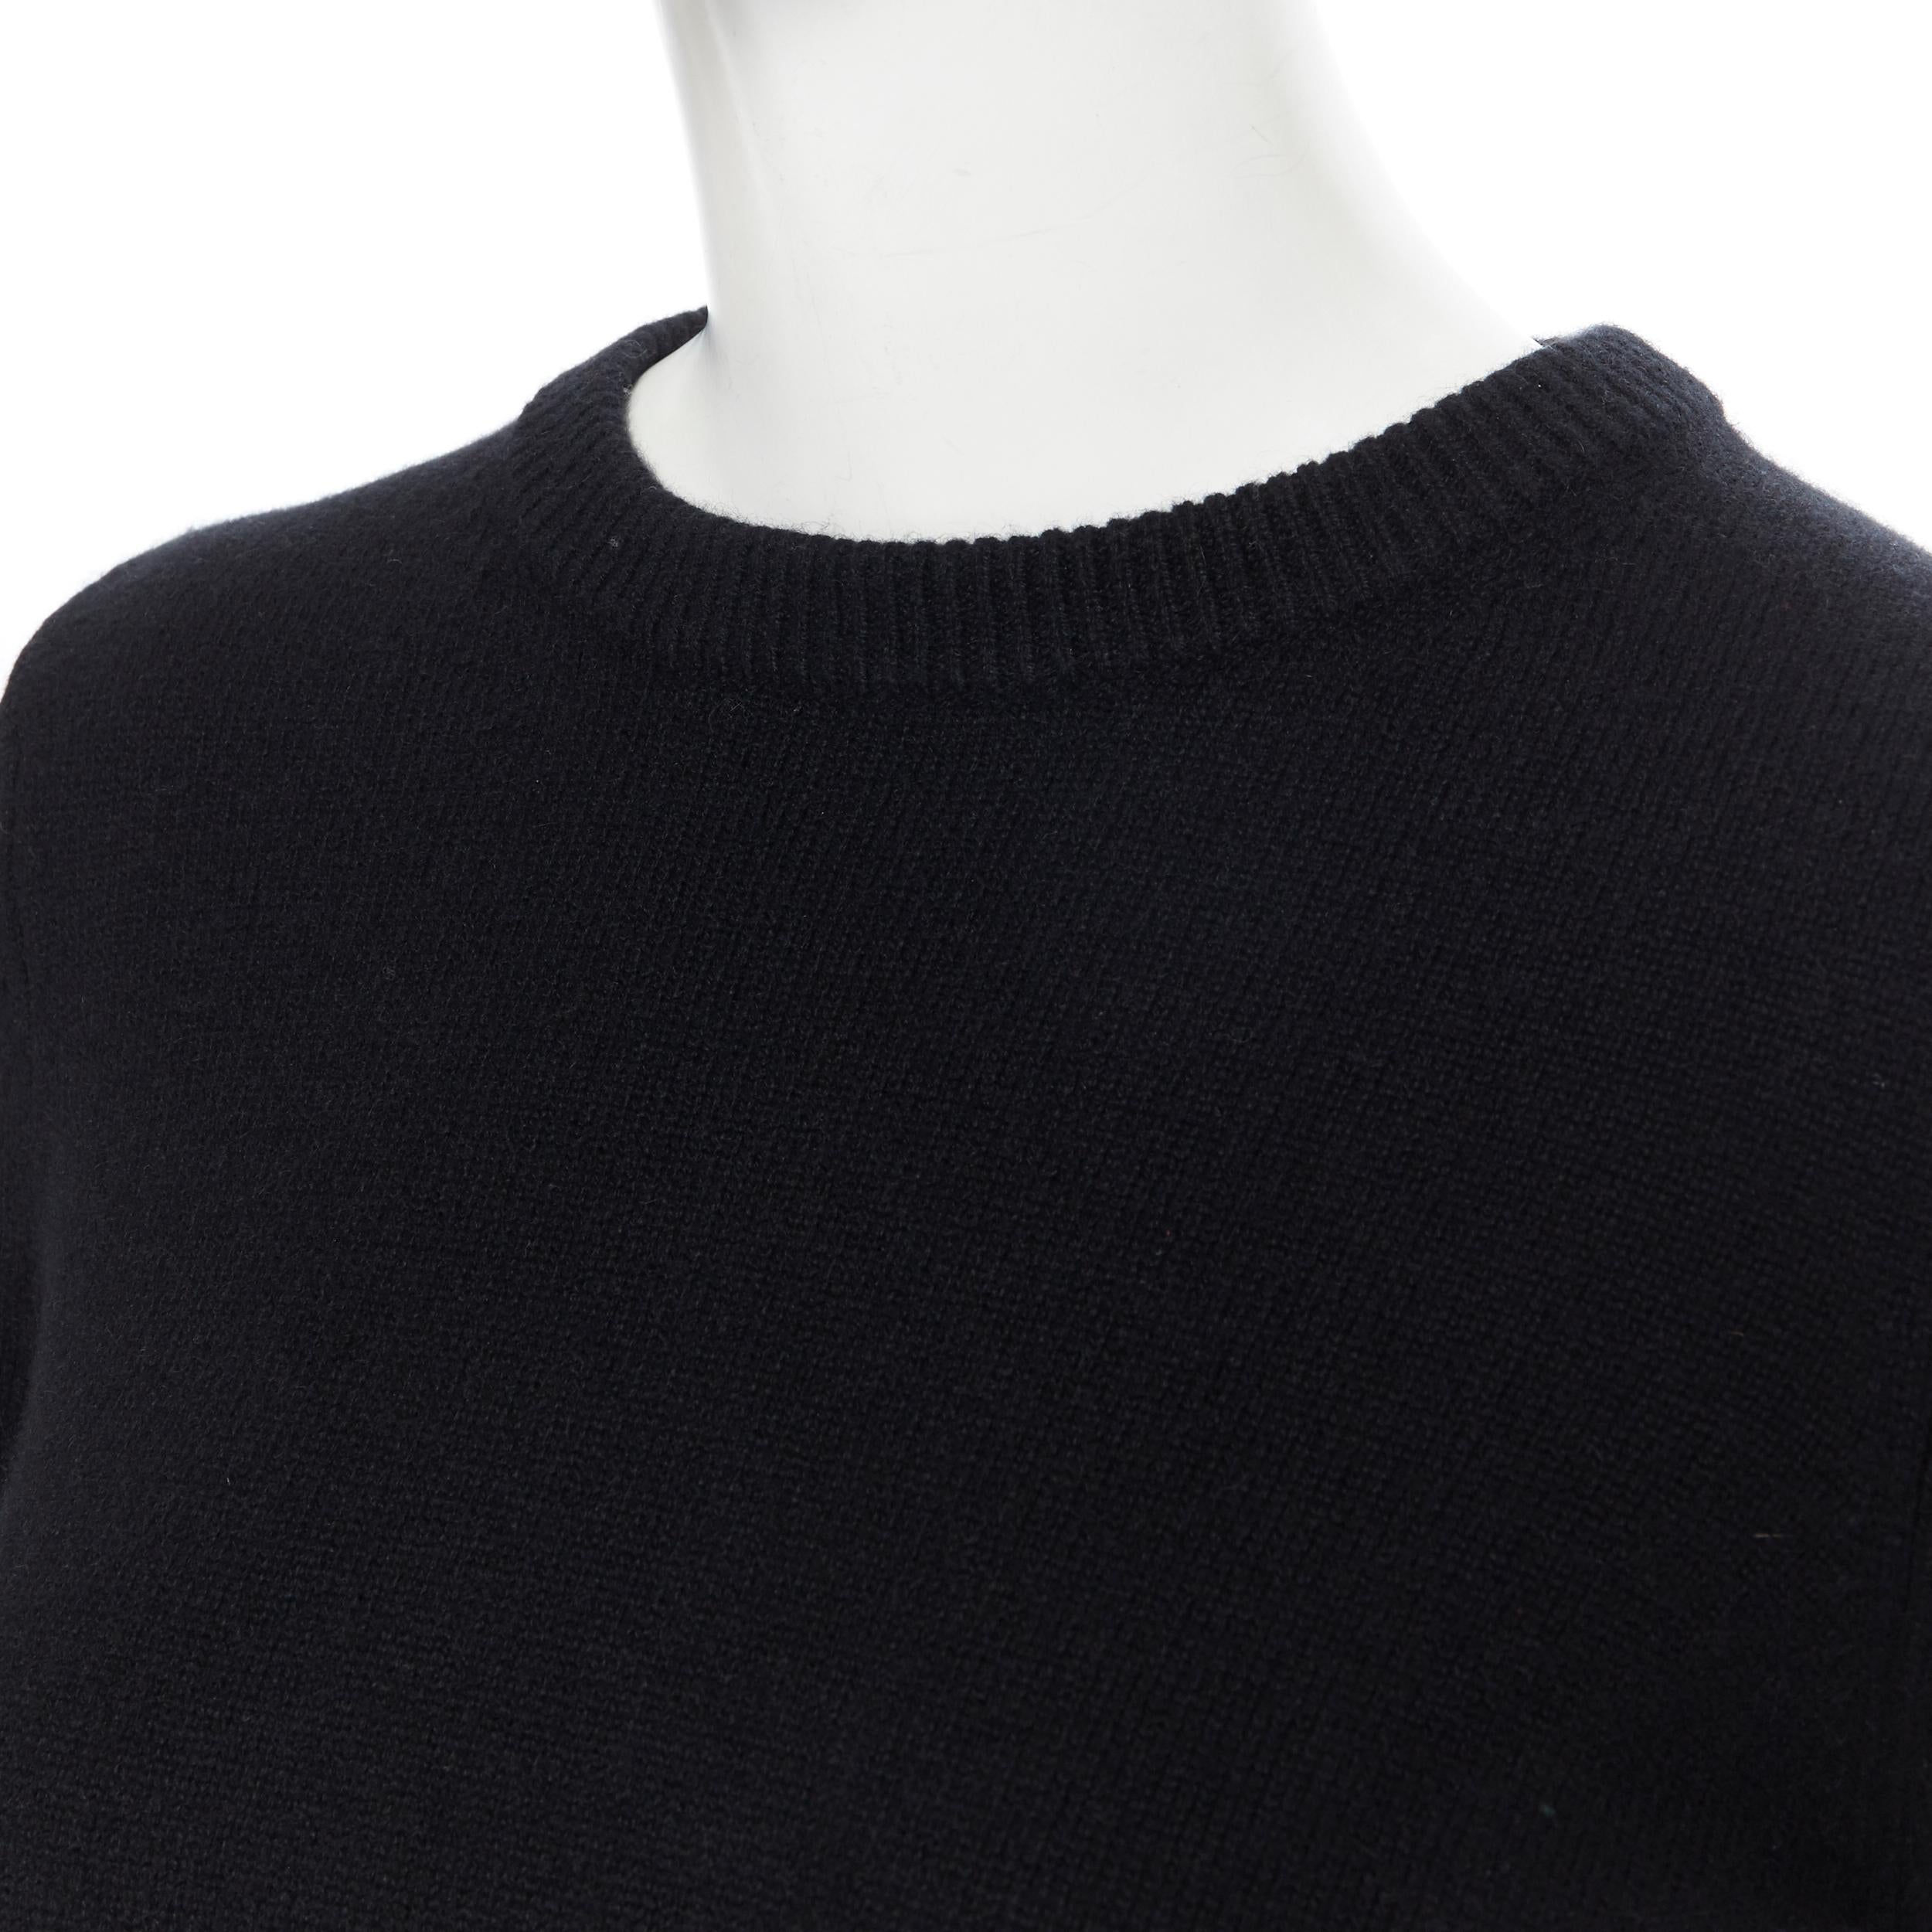 Women's MICHAEL KORS COLLECTION 100% cashmere black long sleeve pullover sweater XS